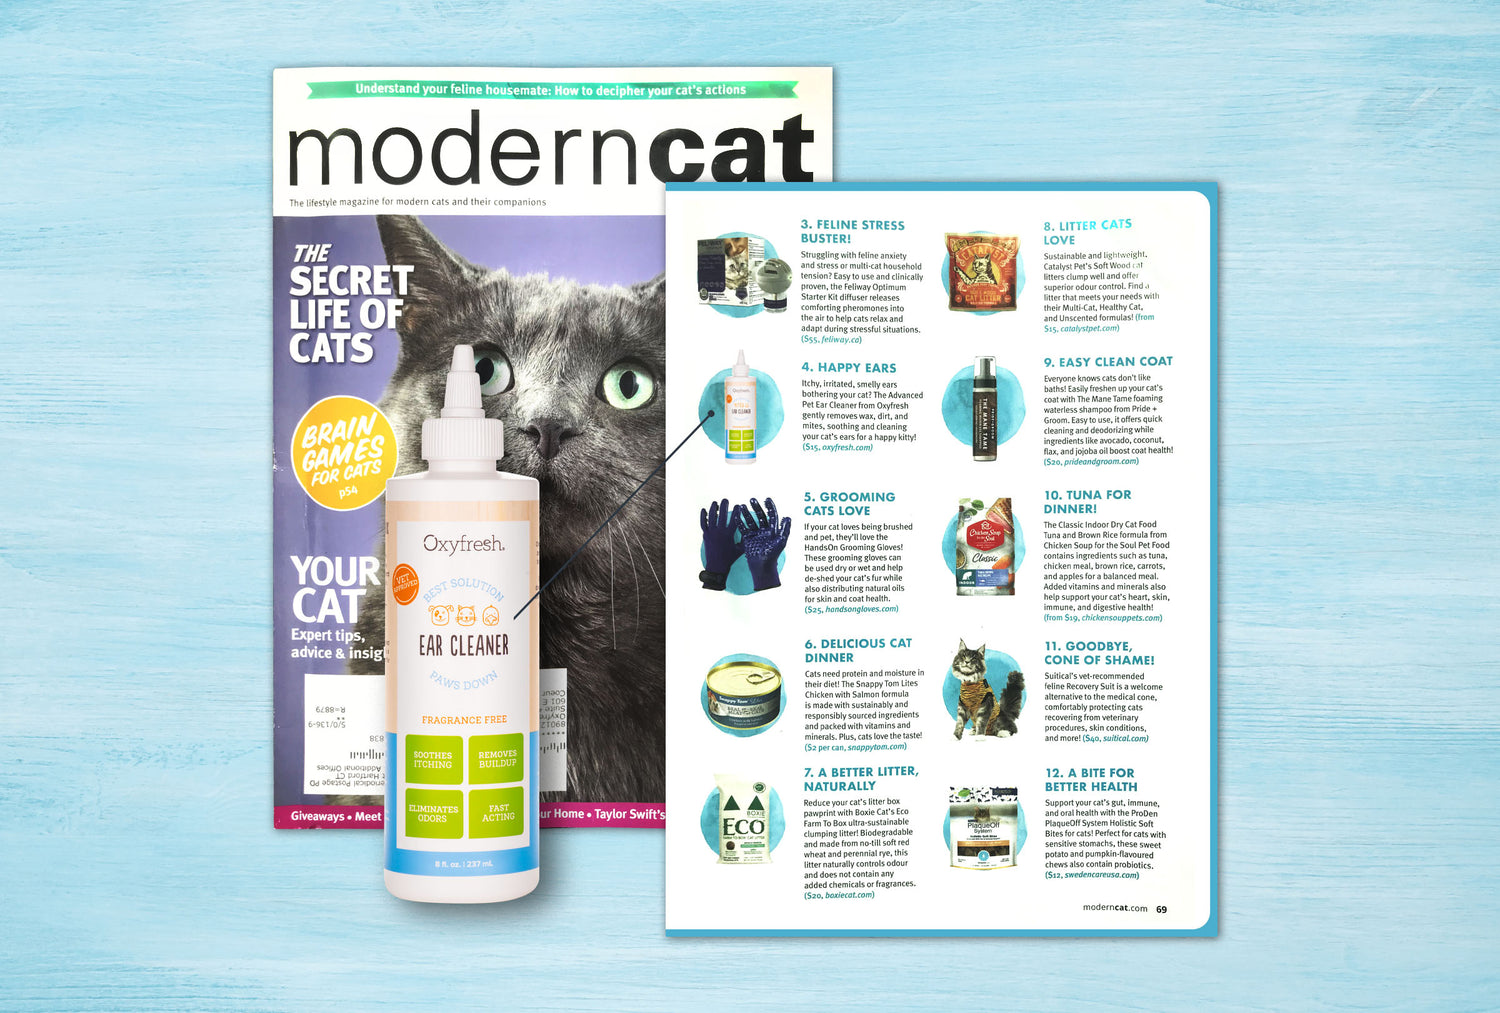 Oxyfresh Pet Ear Cleaner Featured as a "Healthy PAWS" Pick in Modern Cat Magazine